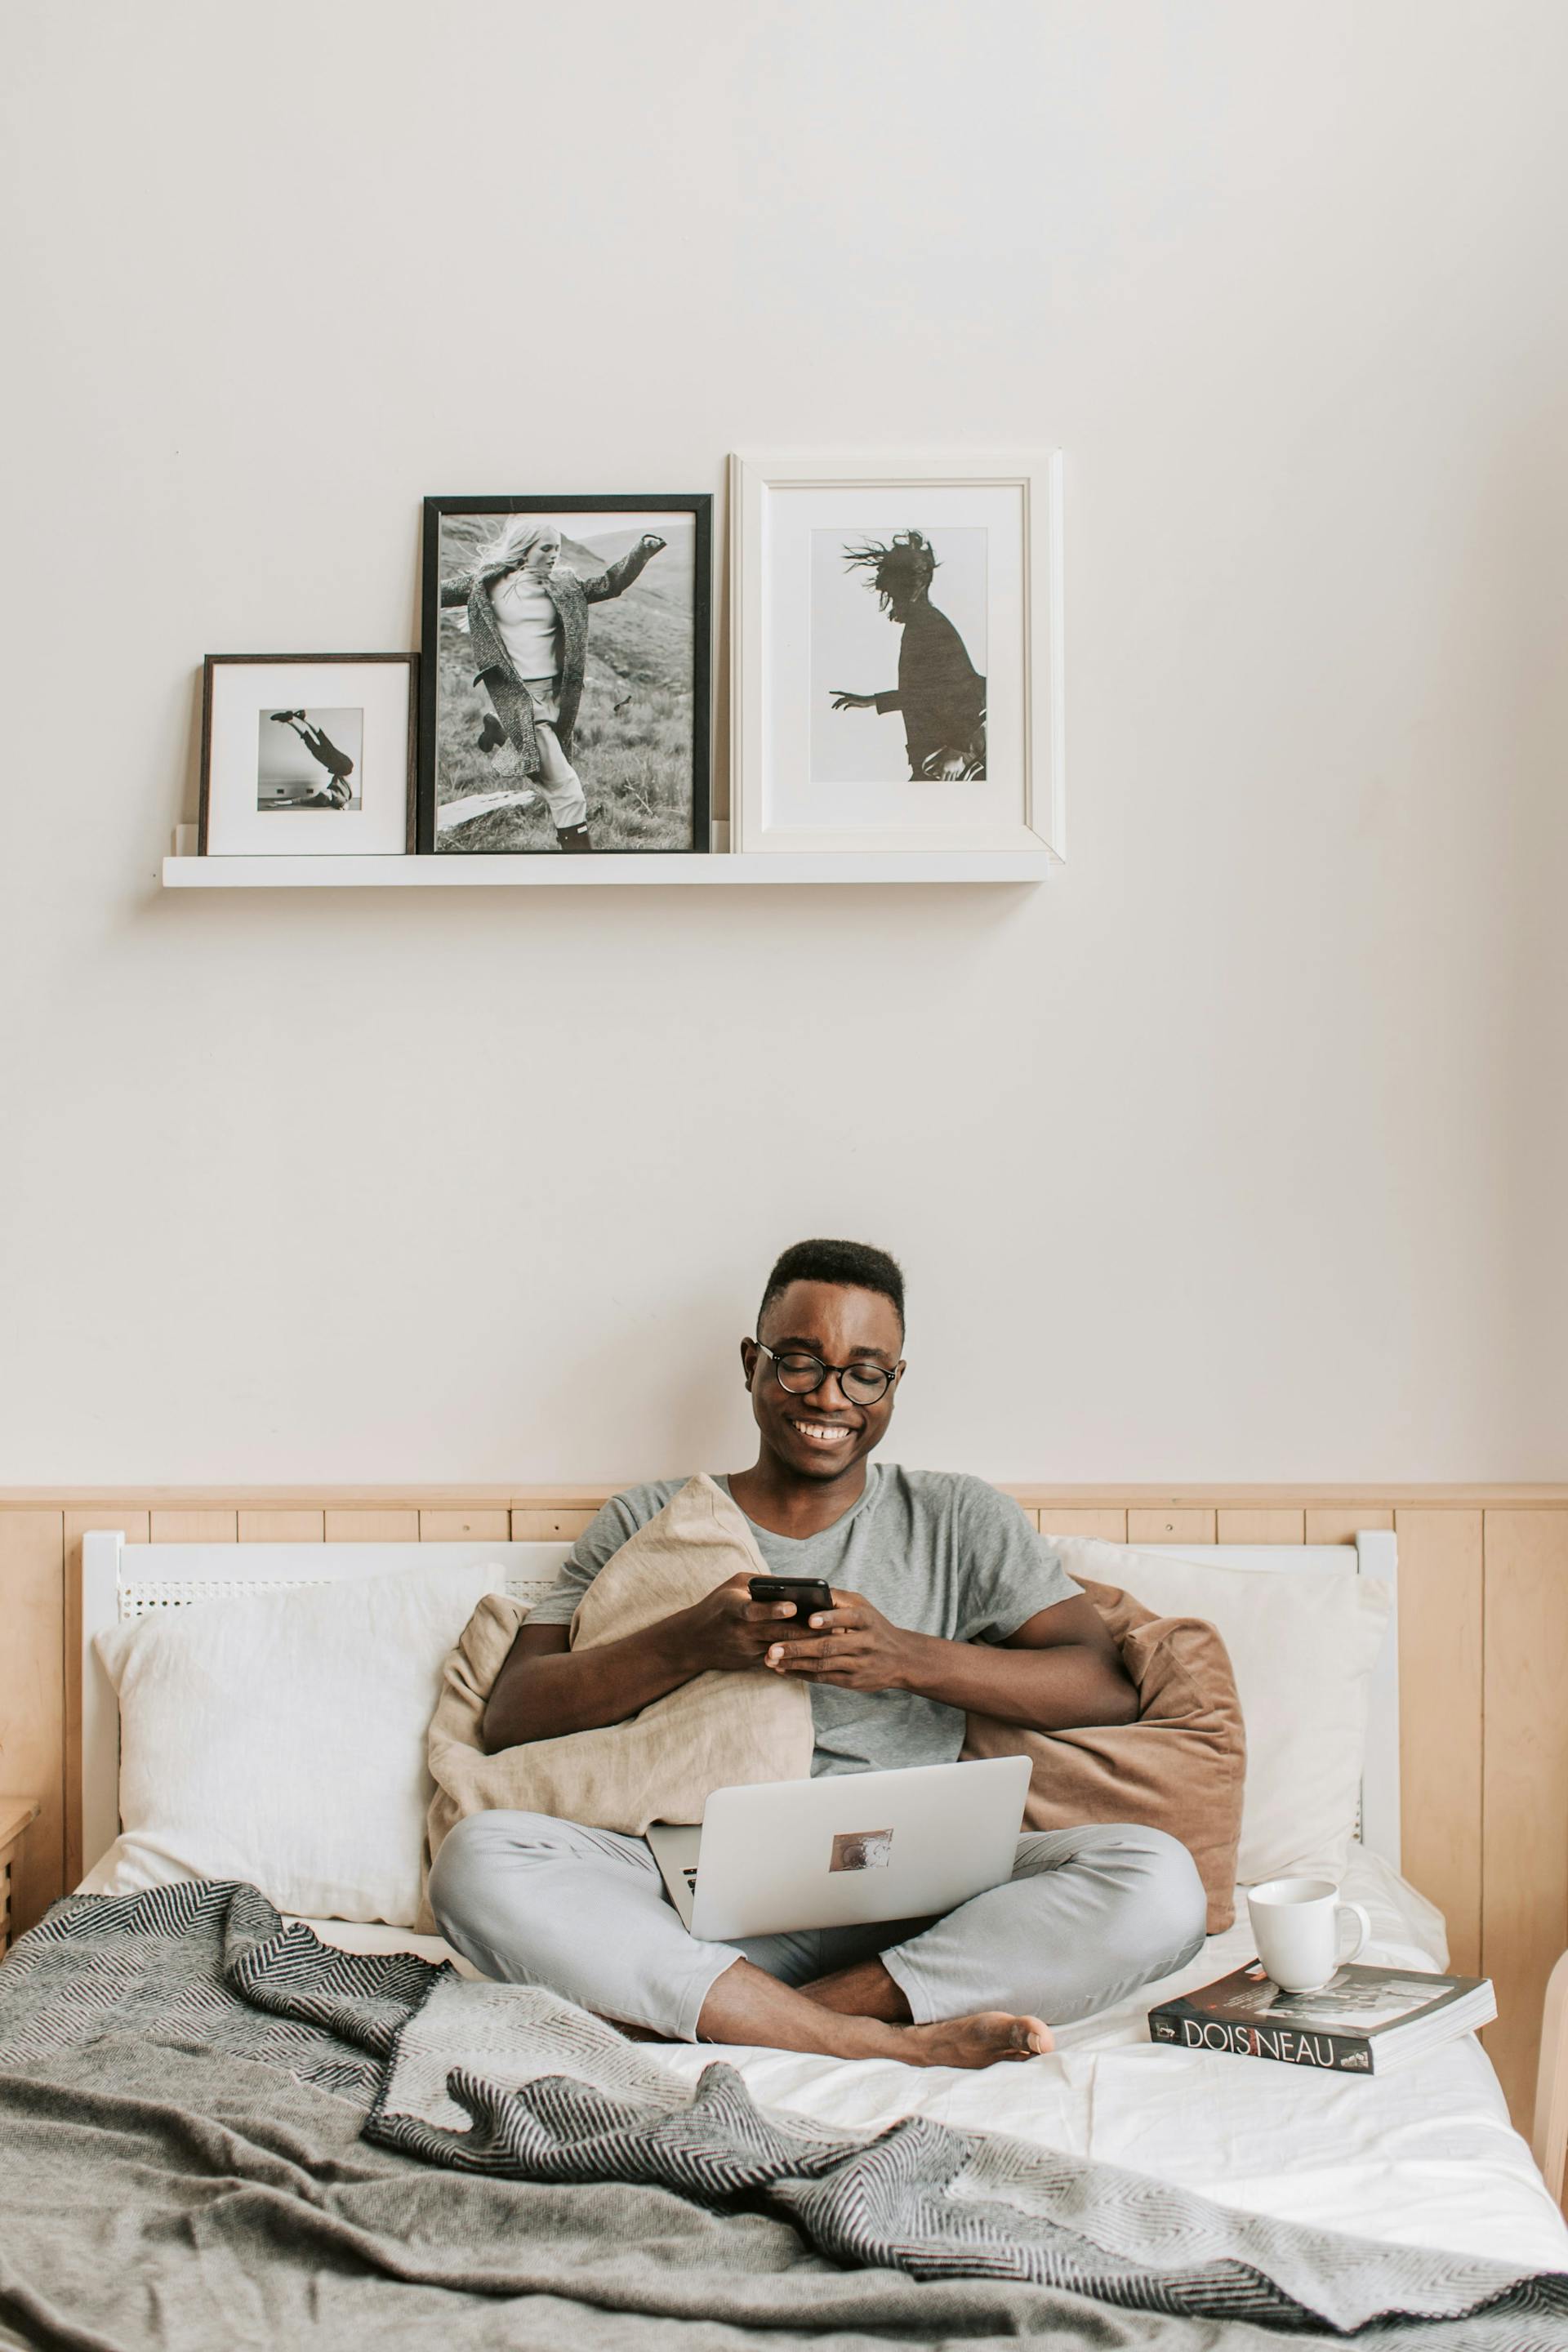 A man sitting on a bed smiling and texting